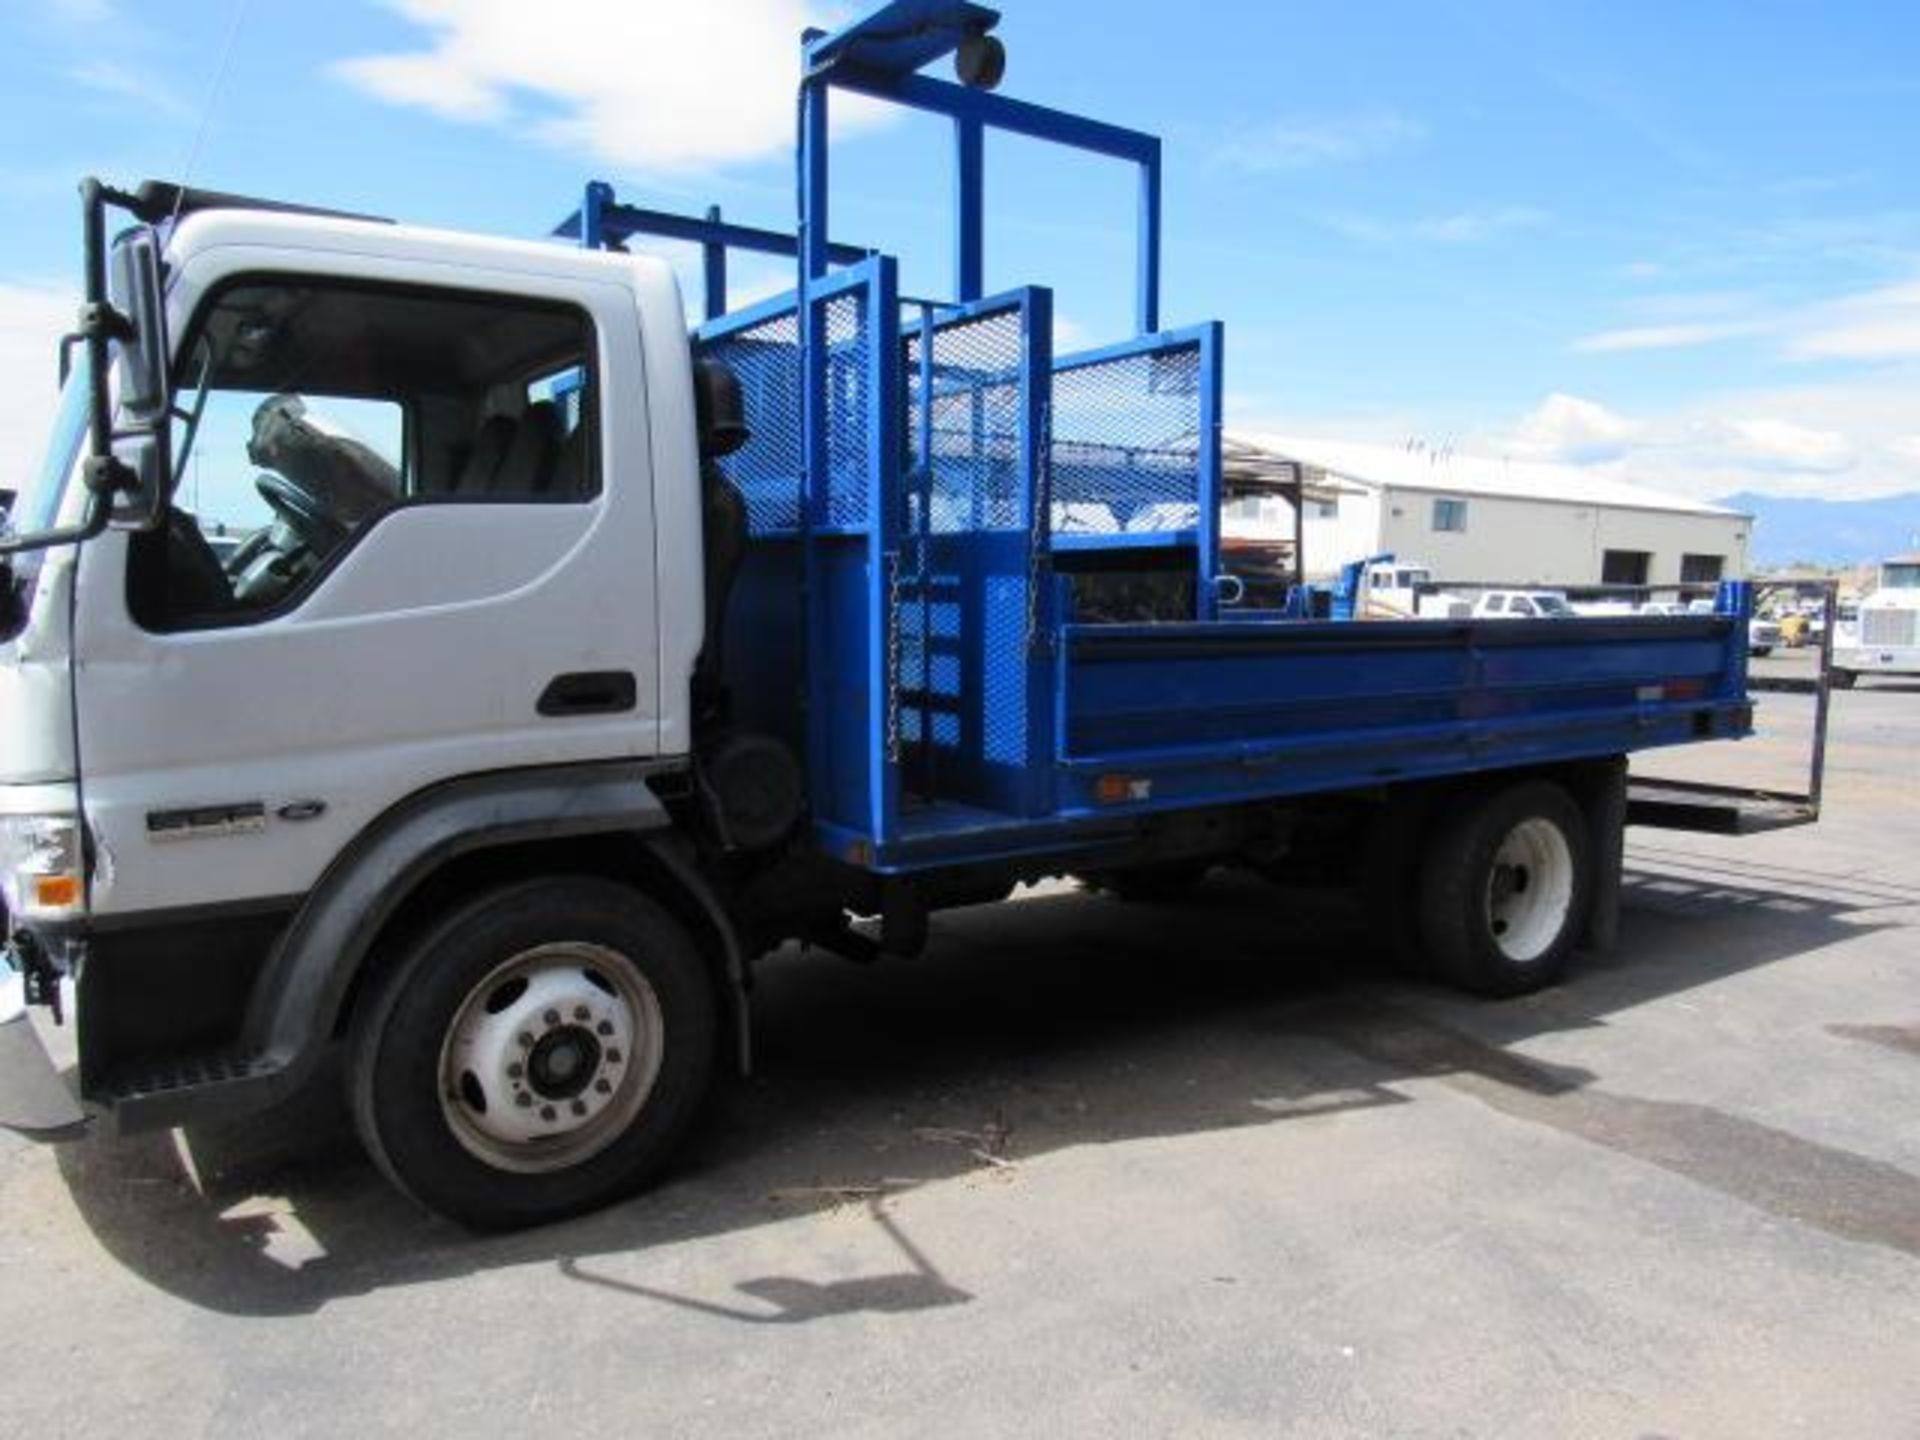 2008 Ford LCF Traffic Control Flatbed Truck, VIN # 3FRLL45Z48V684978, 14 ft. Traffic Control/ - Image 7 of 9